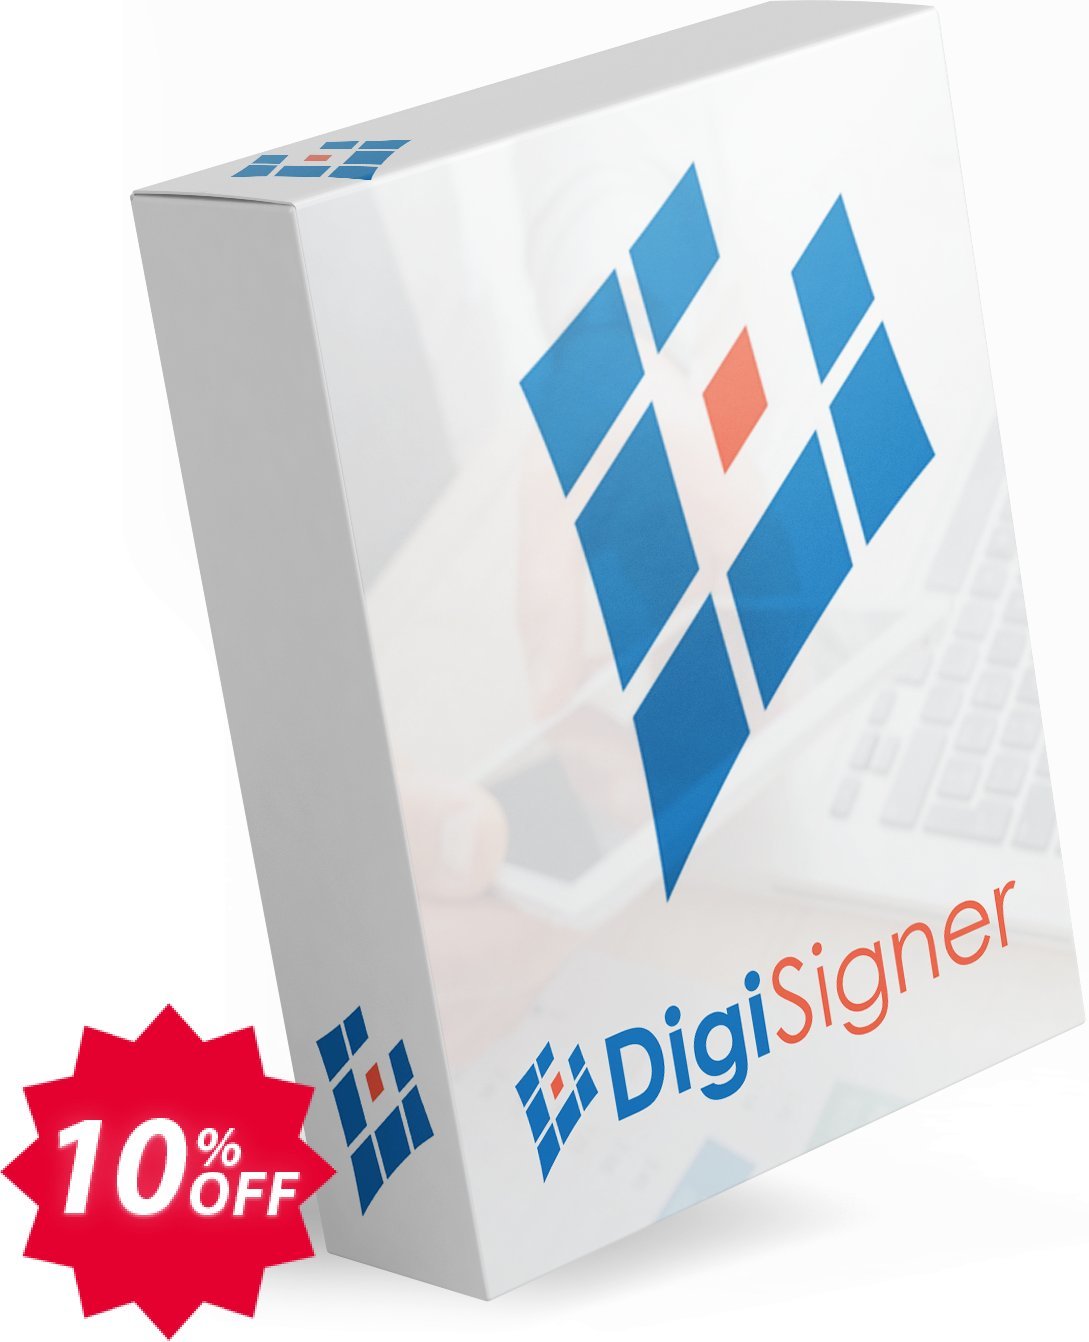 DigiSigner Annual Subscription Coupon code 10% discount 